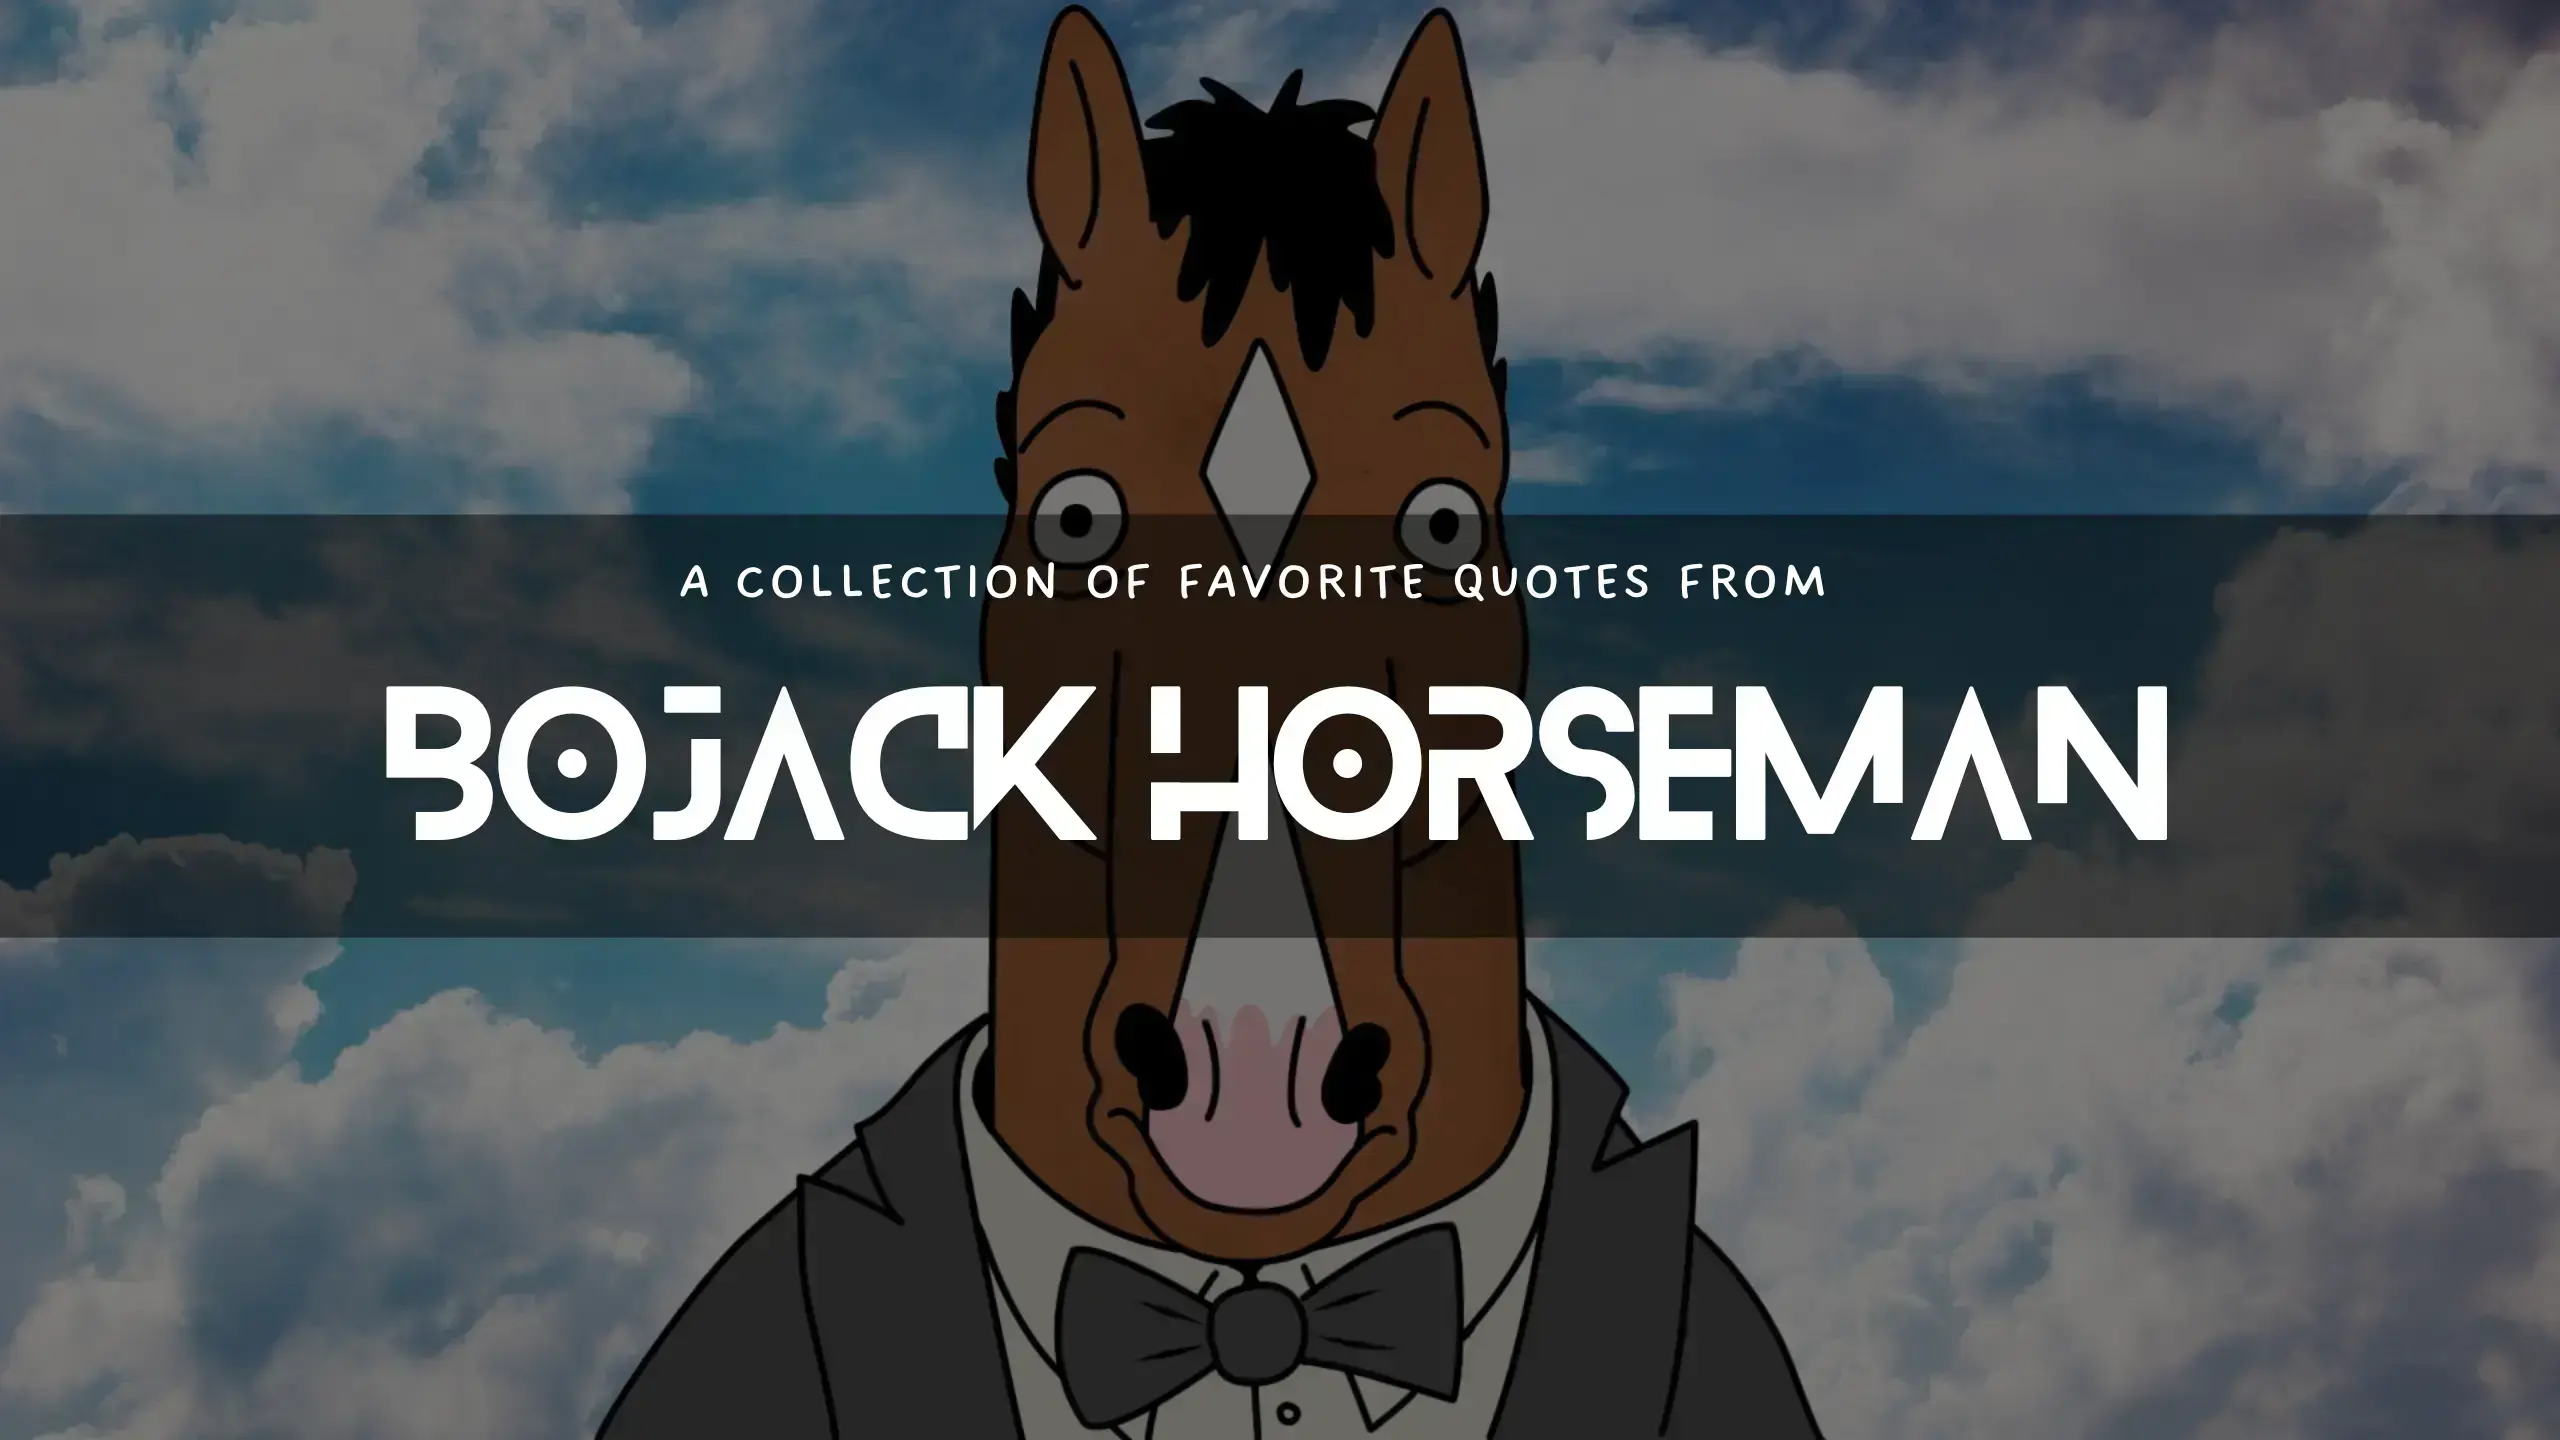 Awesome quotes from Bojack Horseman